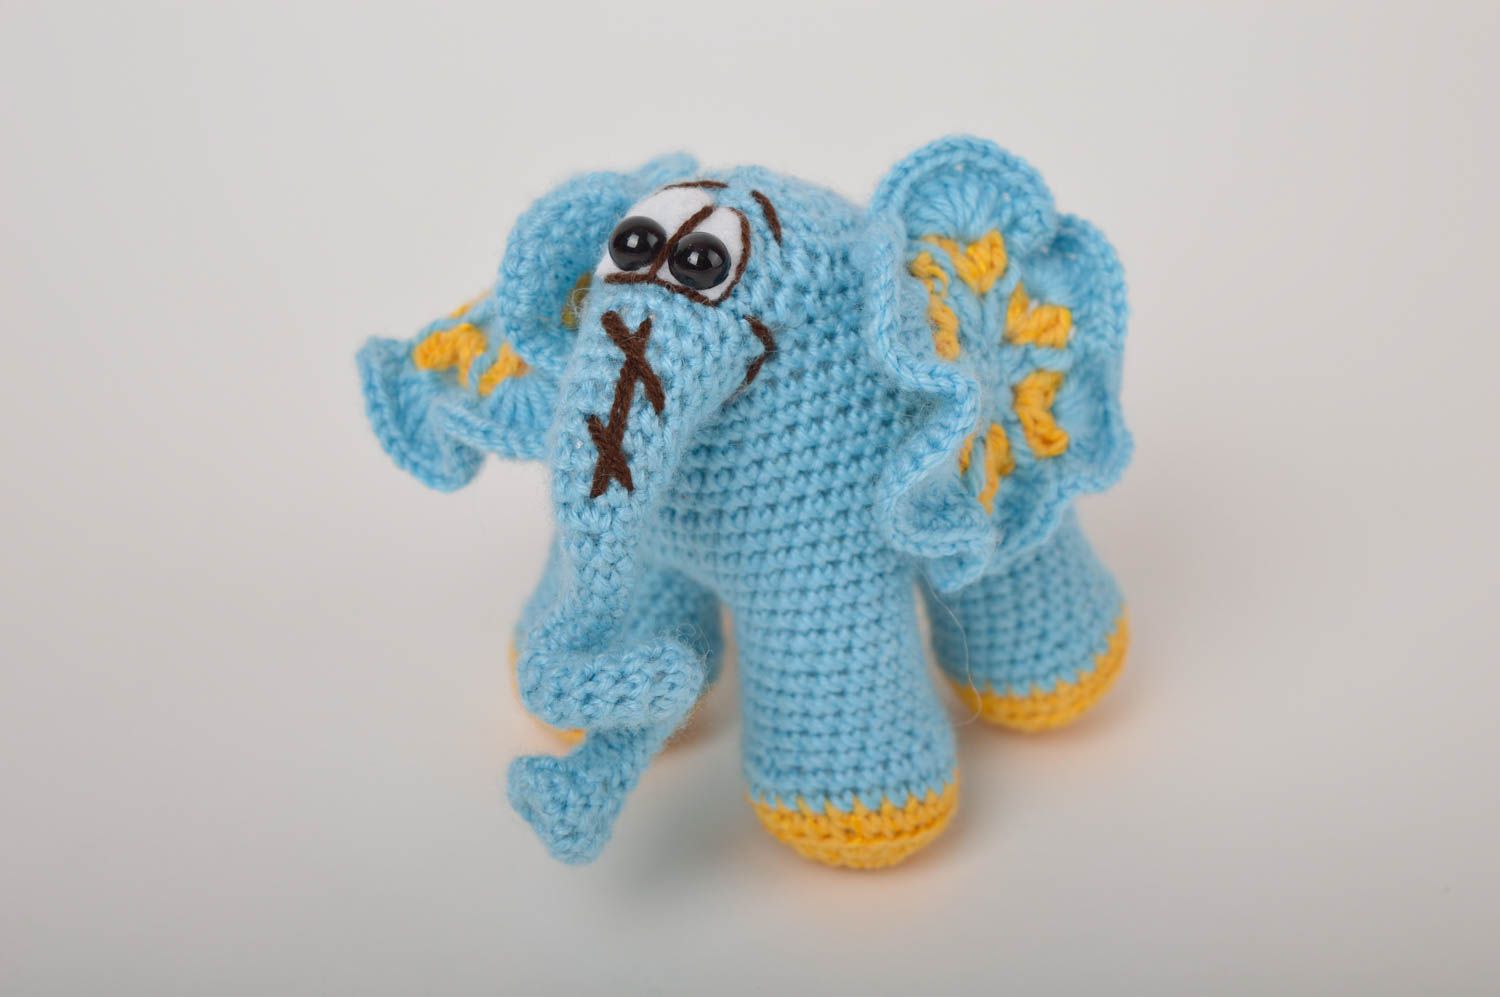 Cute toy hand-crocheted toys for children handmade soft toys for babies photo 2